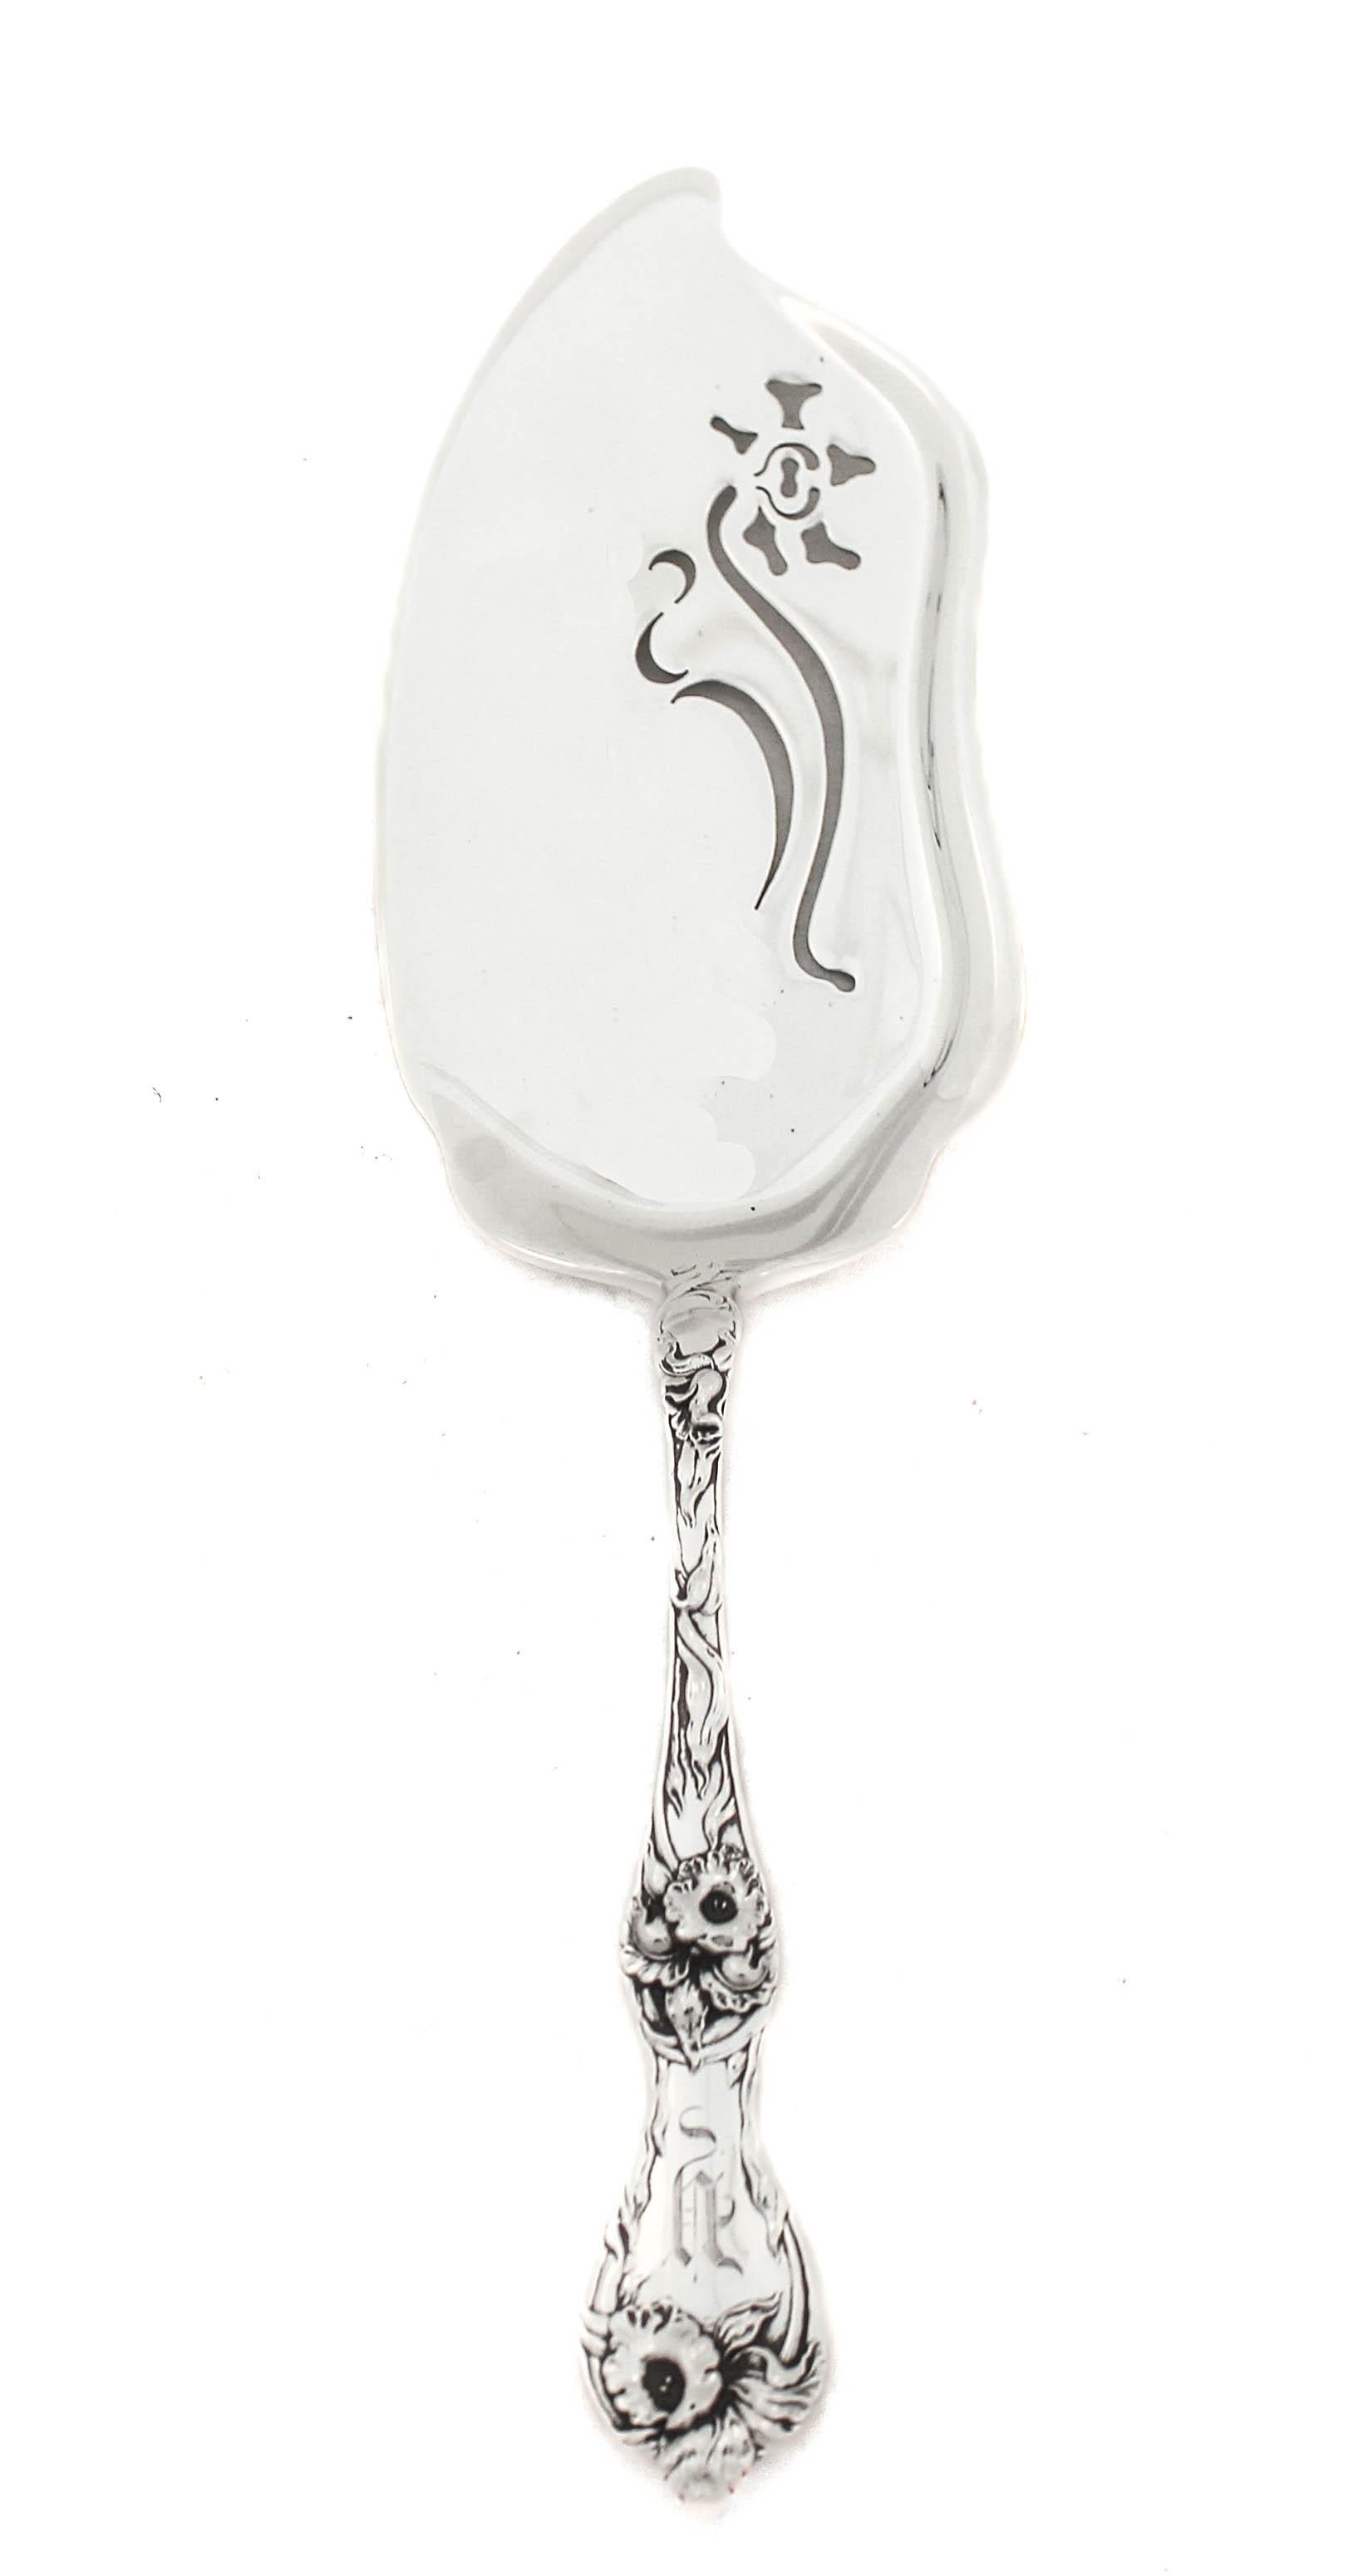 Being offered is a sterling silver Art Nouveau server by Reed and Barton.  The handle has flowers and leaves in an organic “free-flowing” motif.  This is quintessential Art Nouveau; inspired by nature’s beauty.  The server is scalloped and has a